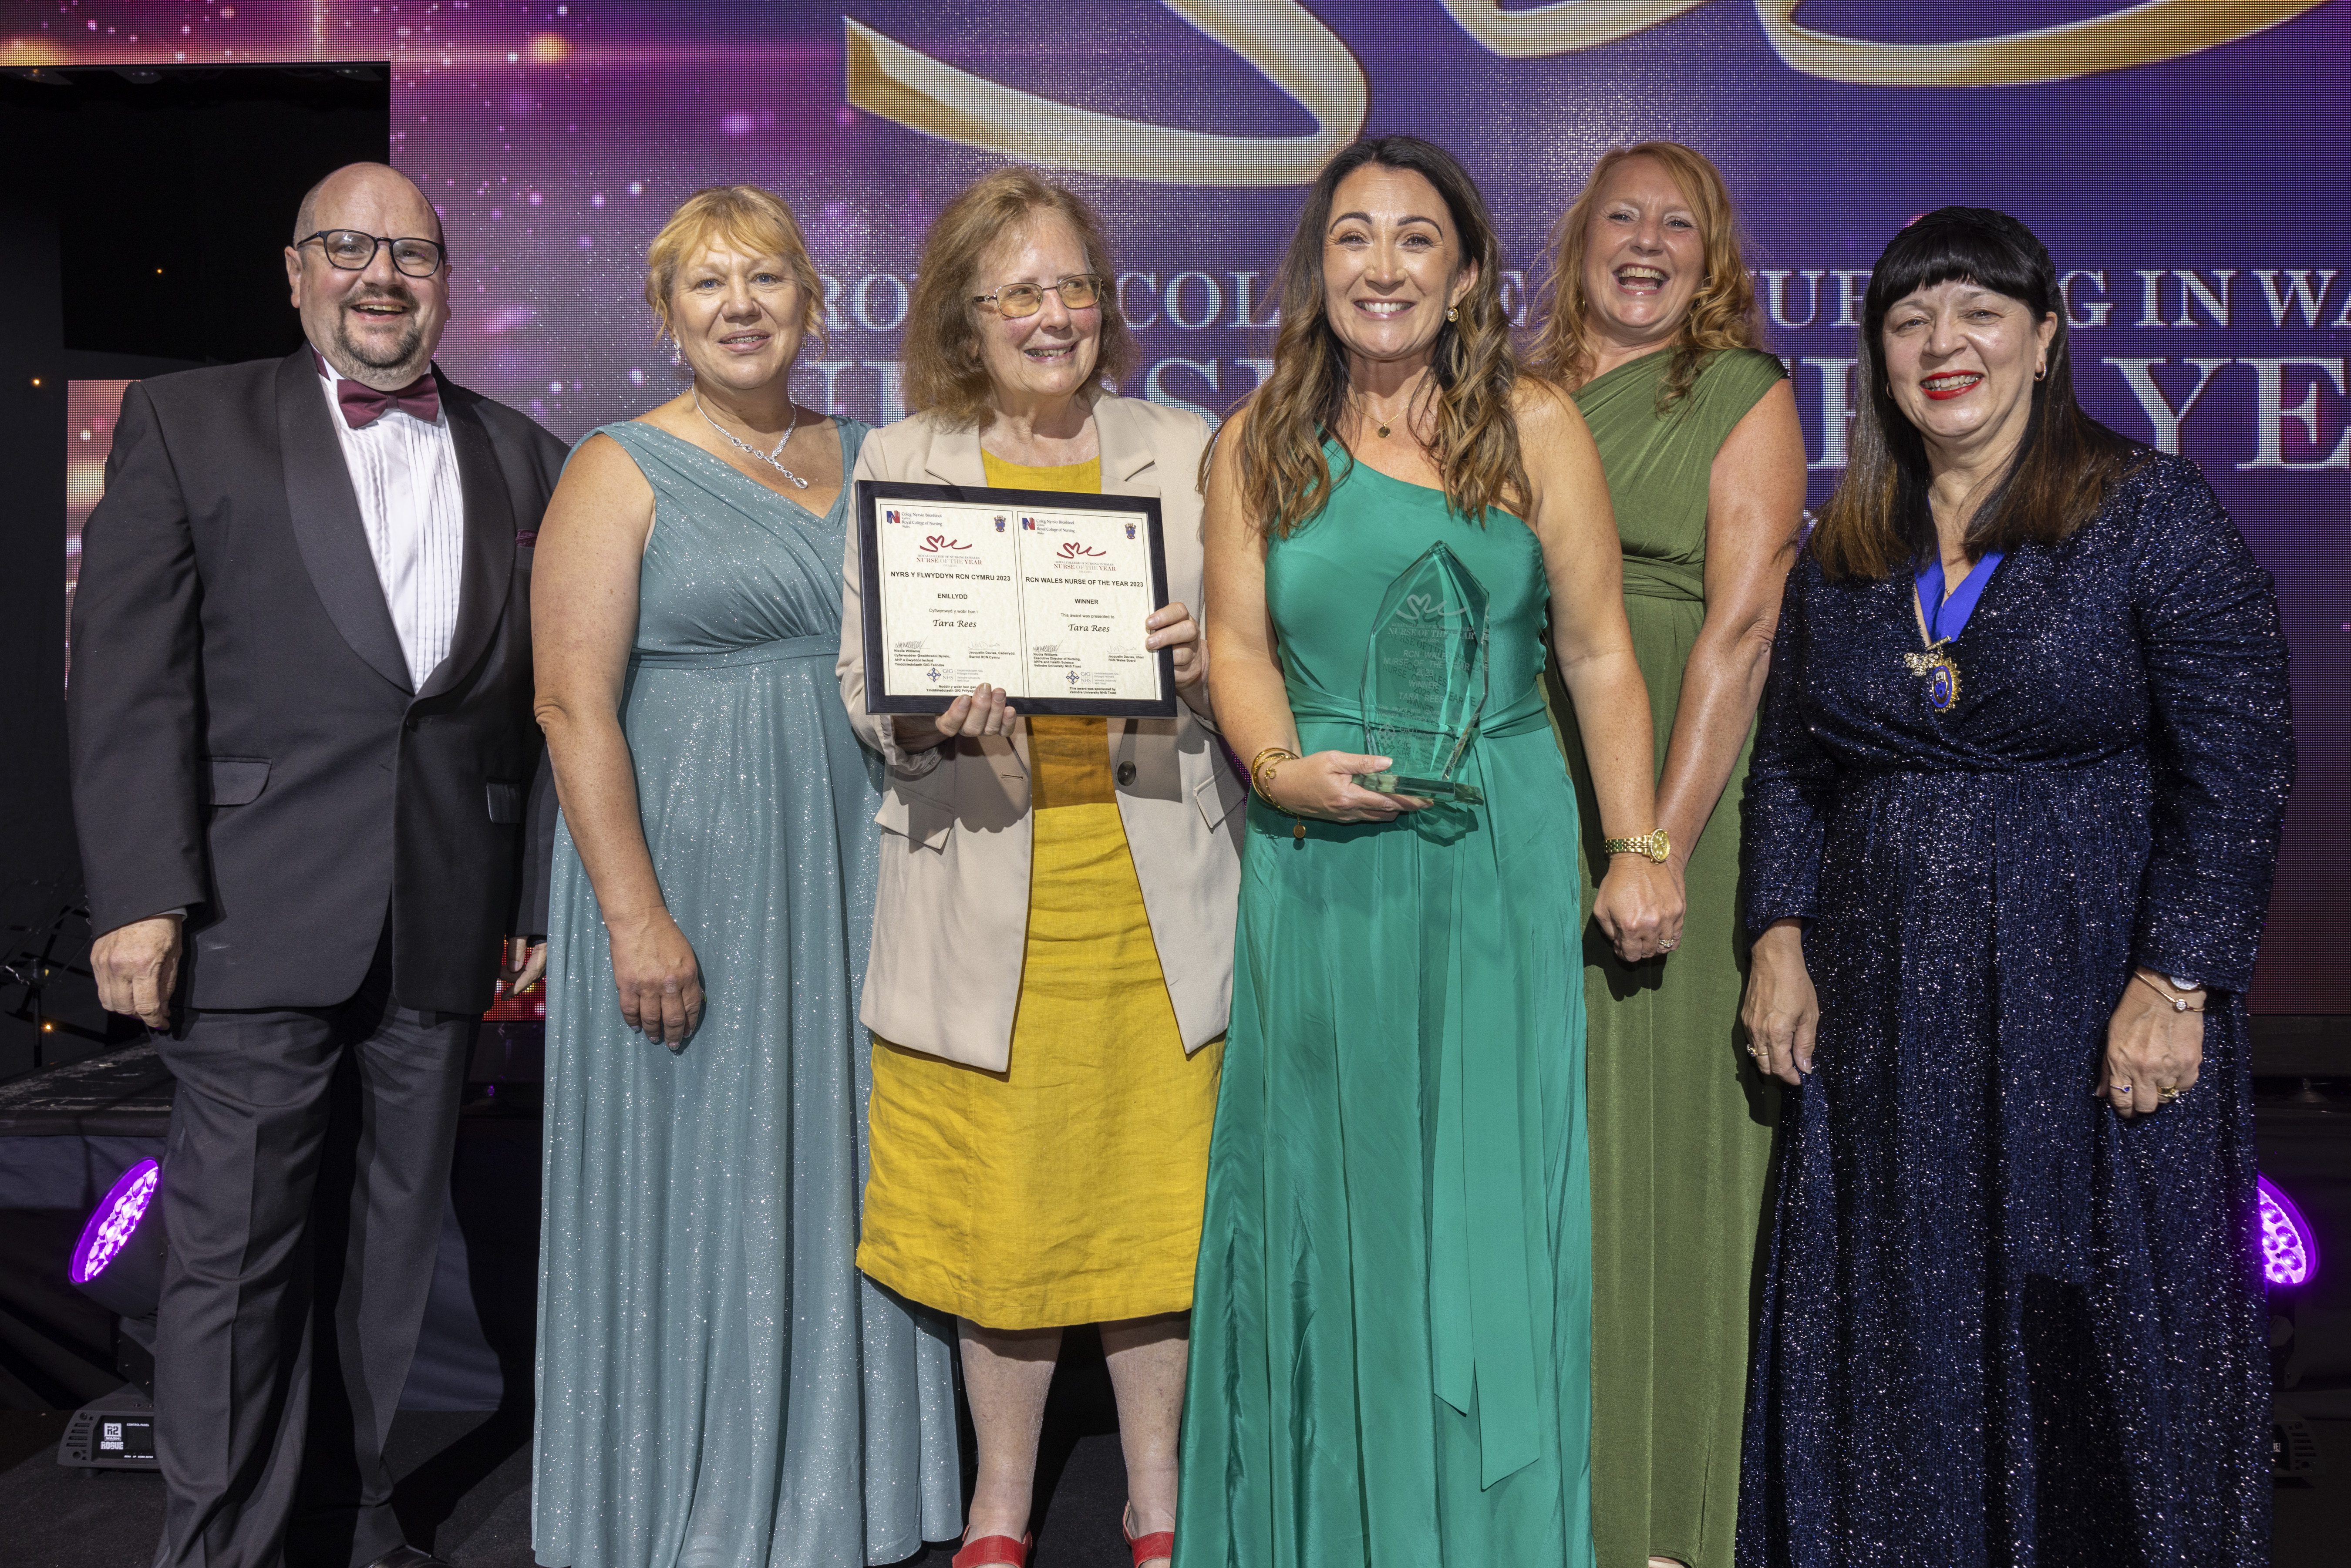 Tara Rees winner of RCN Wales Nurse of the Year 2023 group photo with VIPs and award sponsor